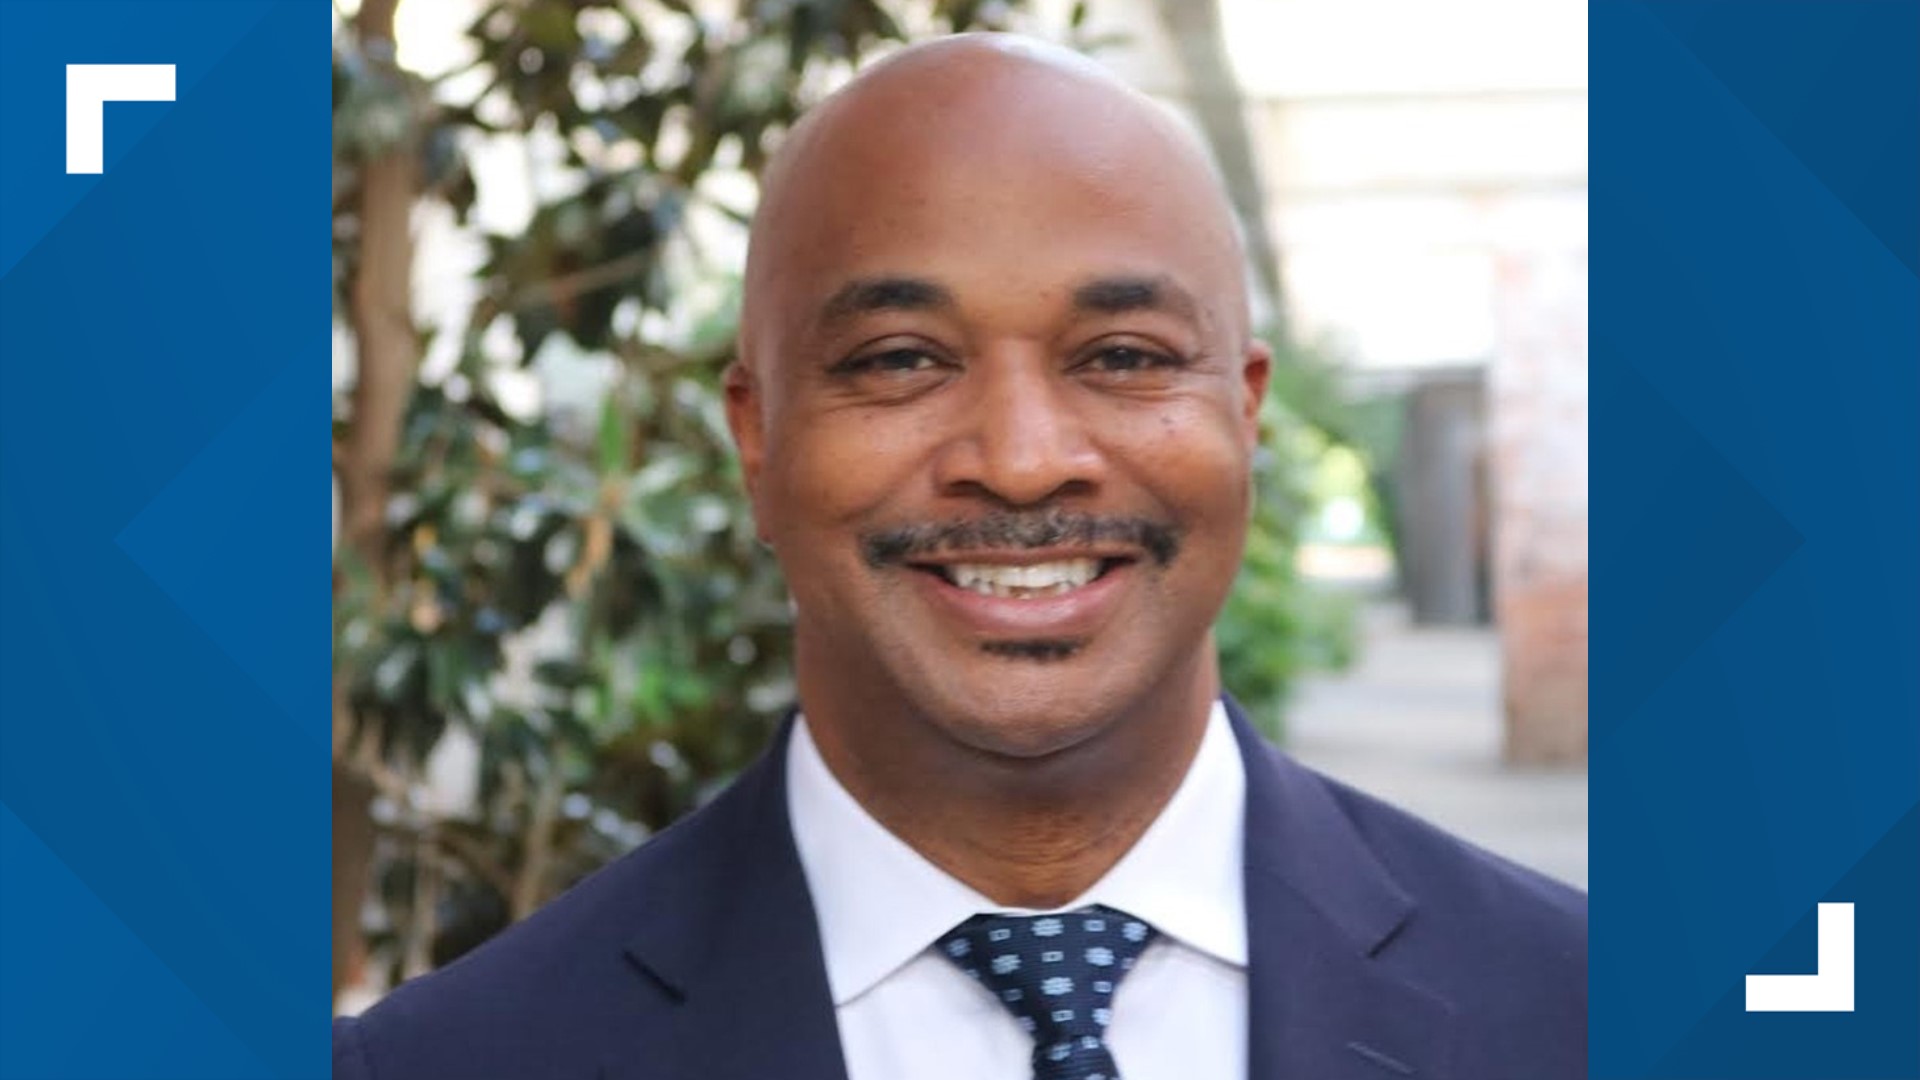 Hall was the leading vote-getter in the Democratic primary for lieutenant governor this year before losing the runoff to Stacey Abrams-endorsed Charlie Bailey.